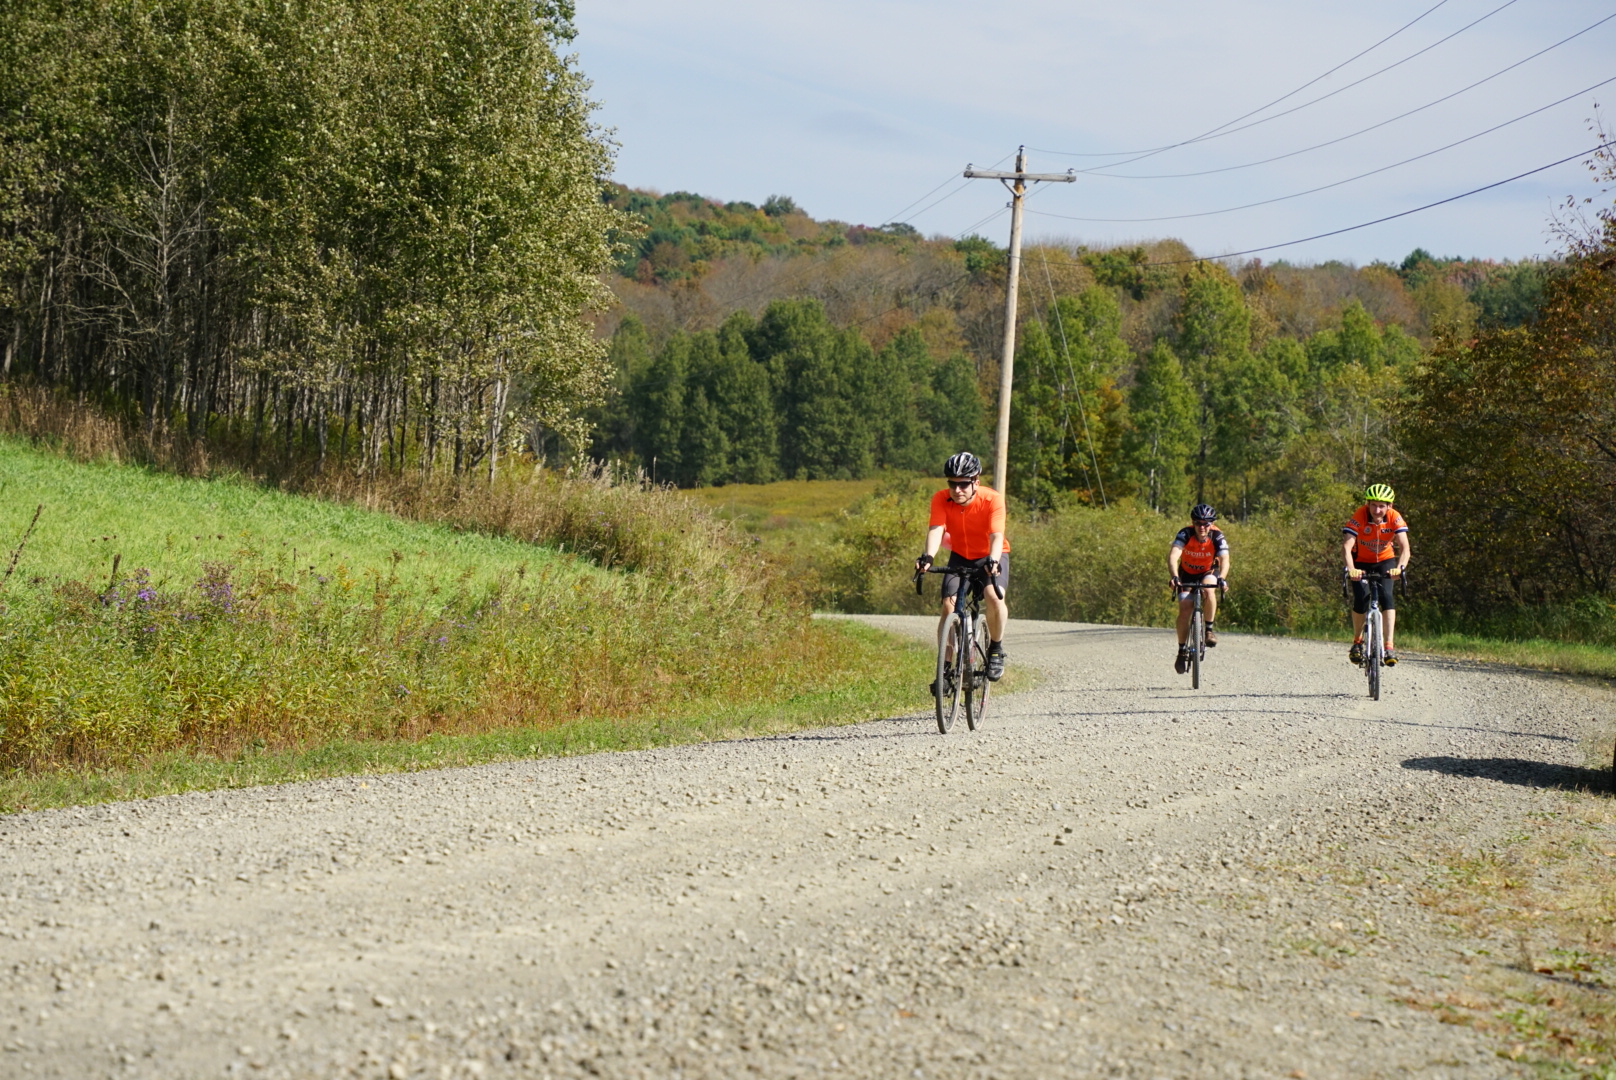 Cyclists during the Gravel Grinder